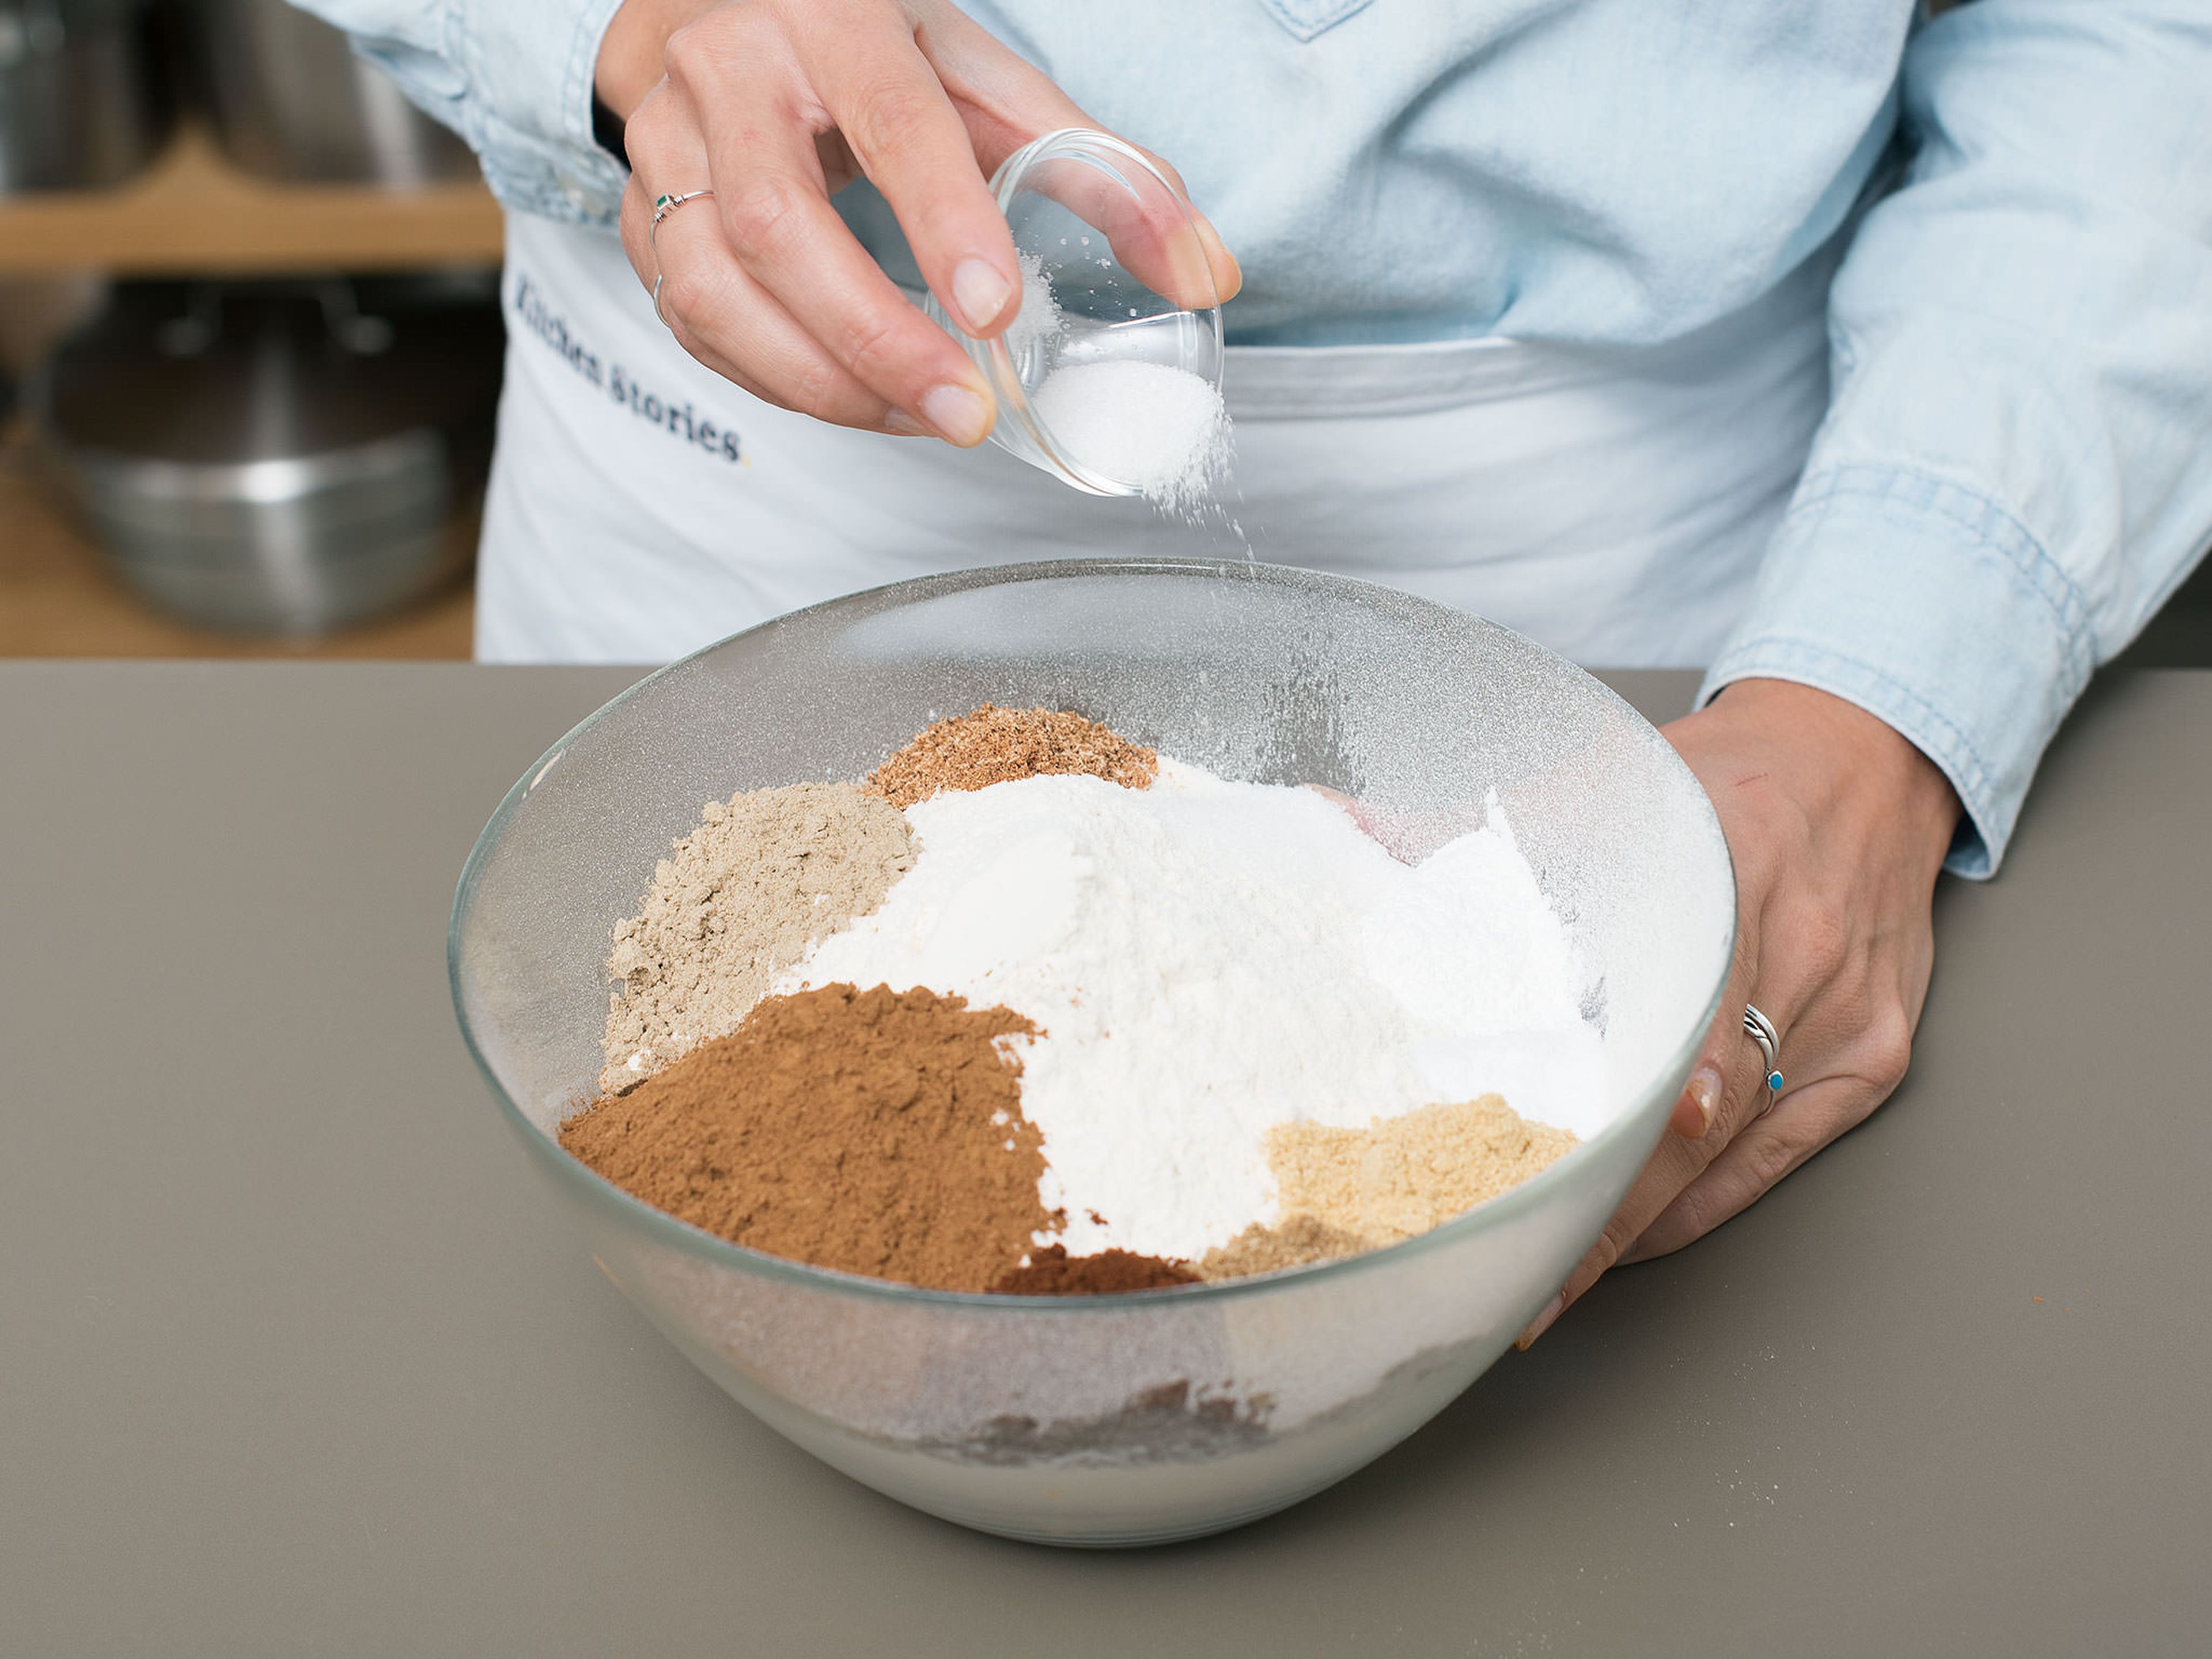 Preheat oven to 175°C/350°F. In a large bowl, combine flour, baking powder, baking soda, salt, part of the cinnamon, ginger, cardamom, nutmeg, clove, and coriander.